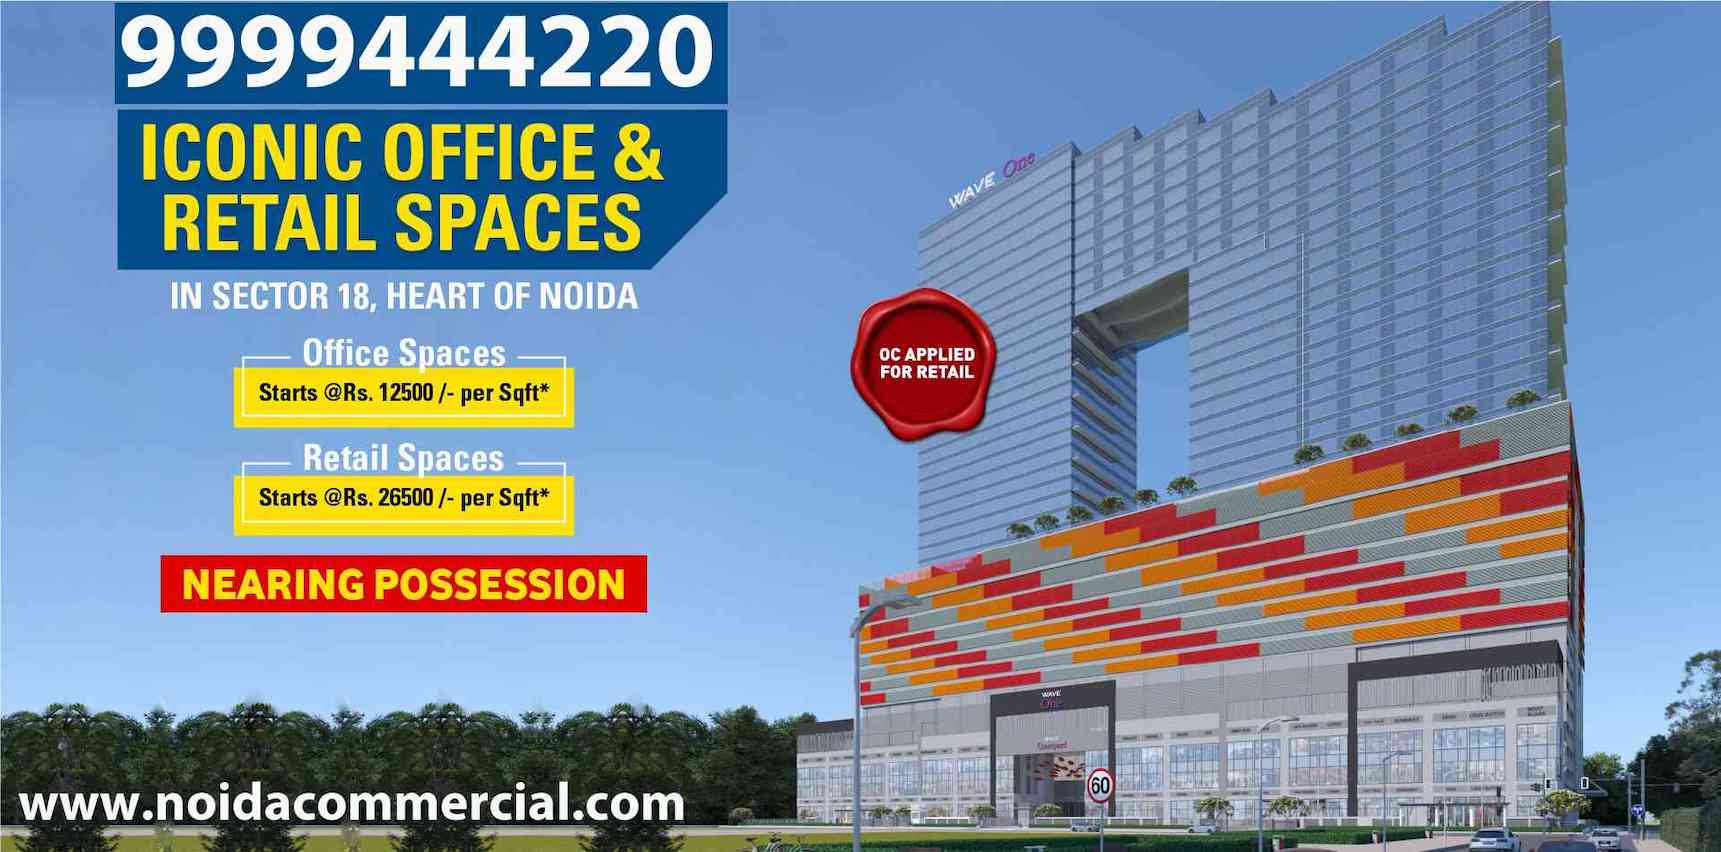 Find Luxury Office Spaces and Retail Shops in Wave One Noida